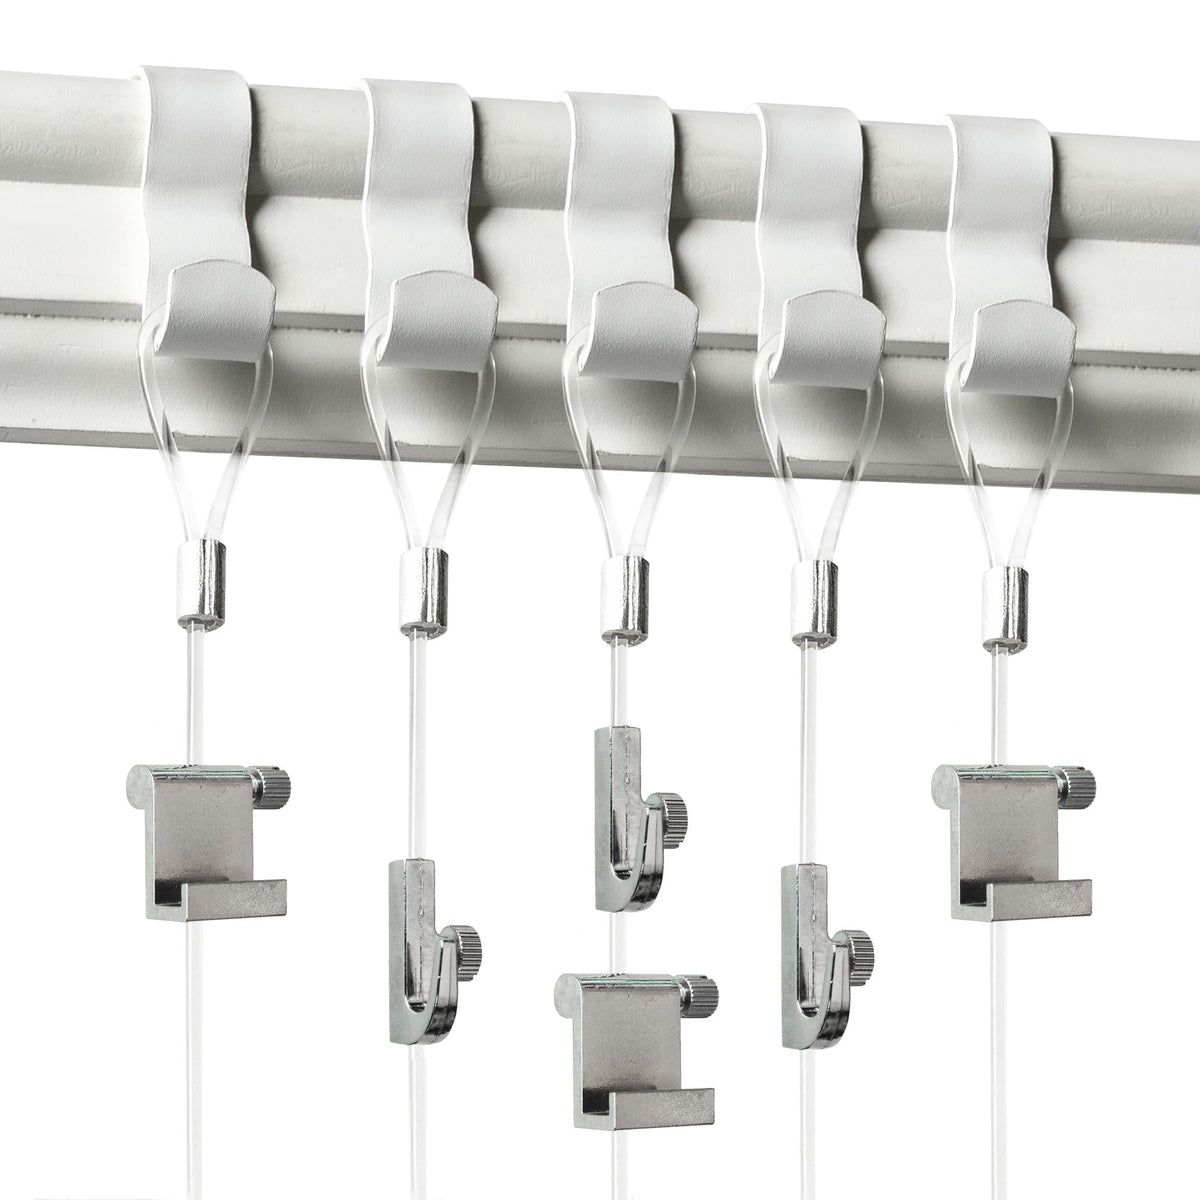 Gallery Kit with White Picture Rail Hooks - GSK-12 - Picture Hang Solutions